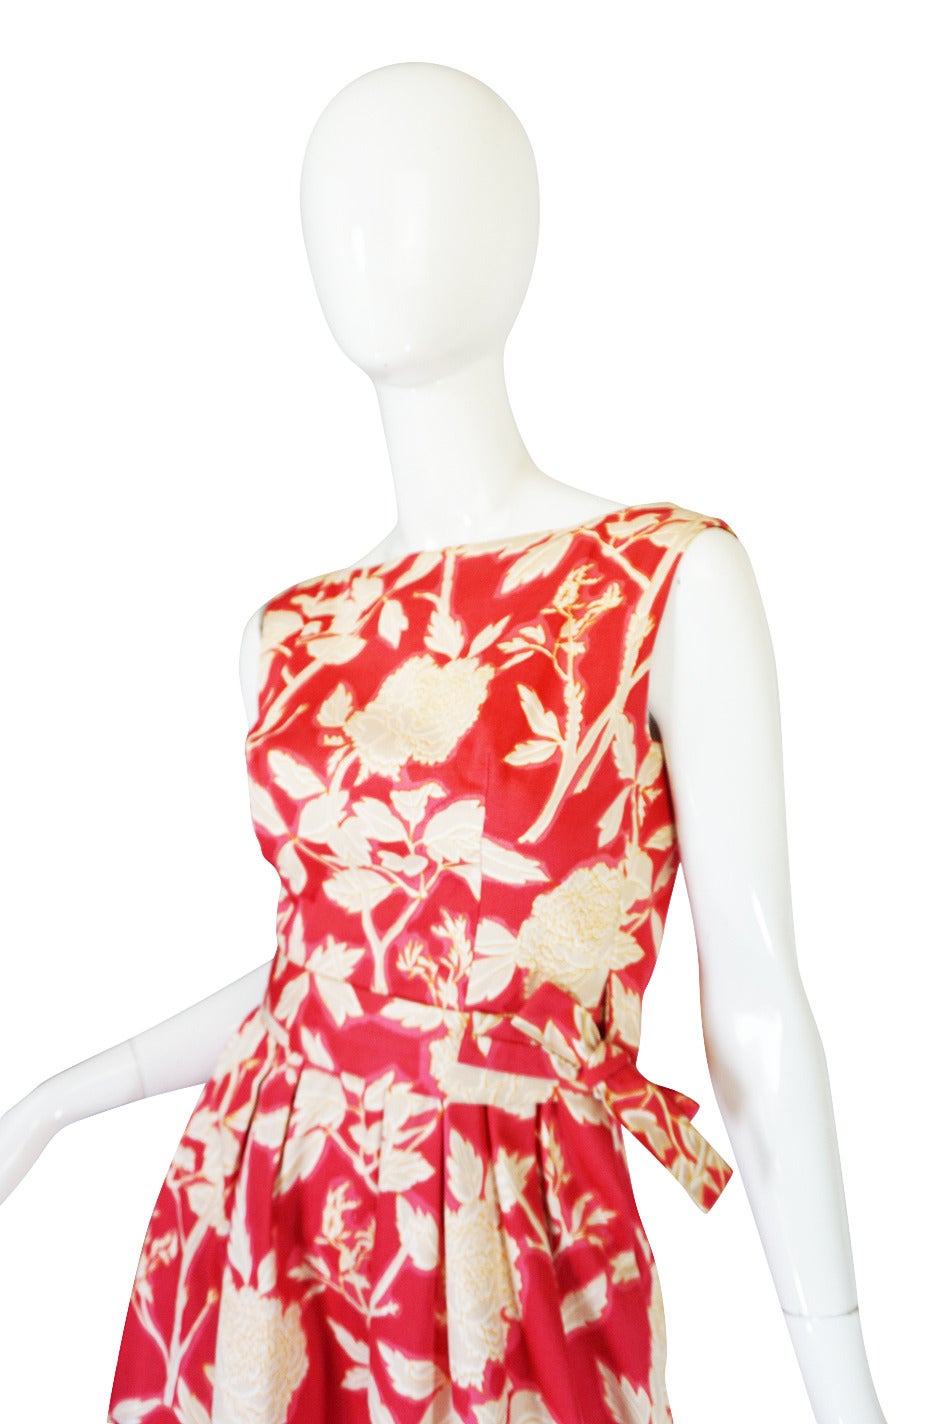 Women's Early 1960s Floral Print Christian Dior New York Dress